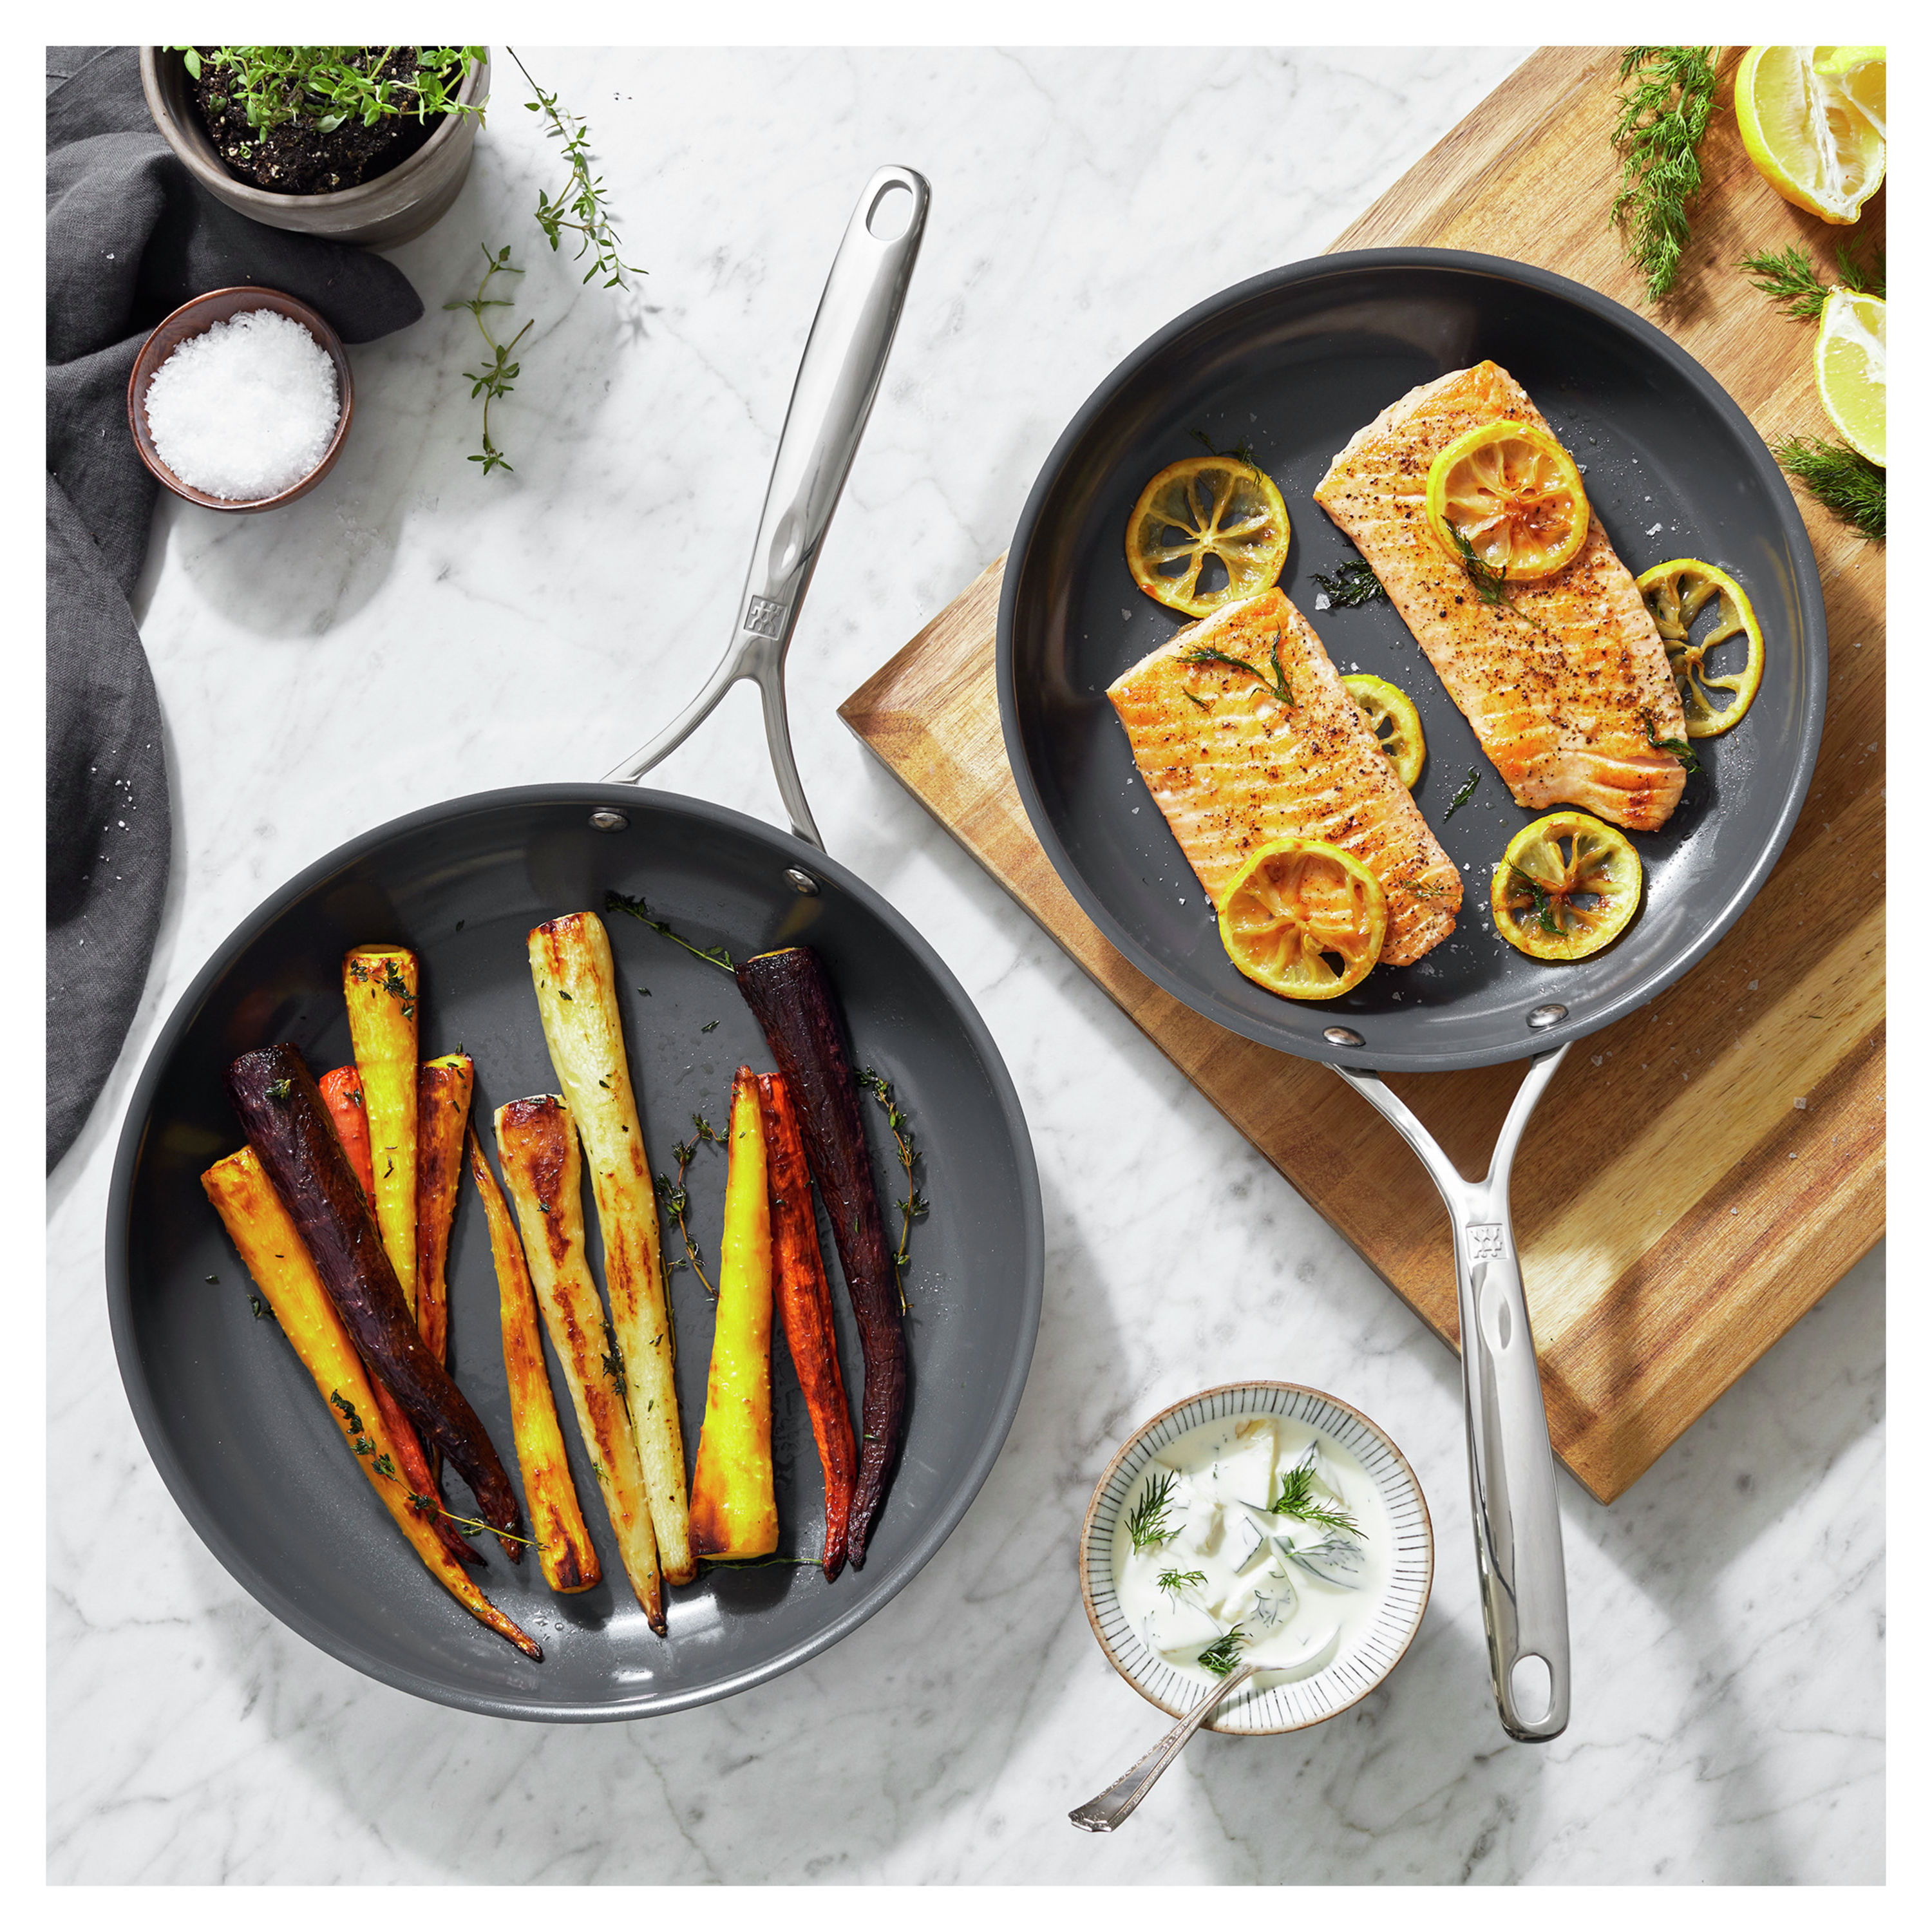 ZWILLING Energy Plus 8-inch Stainless Steel Ceramic Nonstick Fry Pan, 8-inch  - Foods Co.